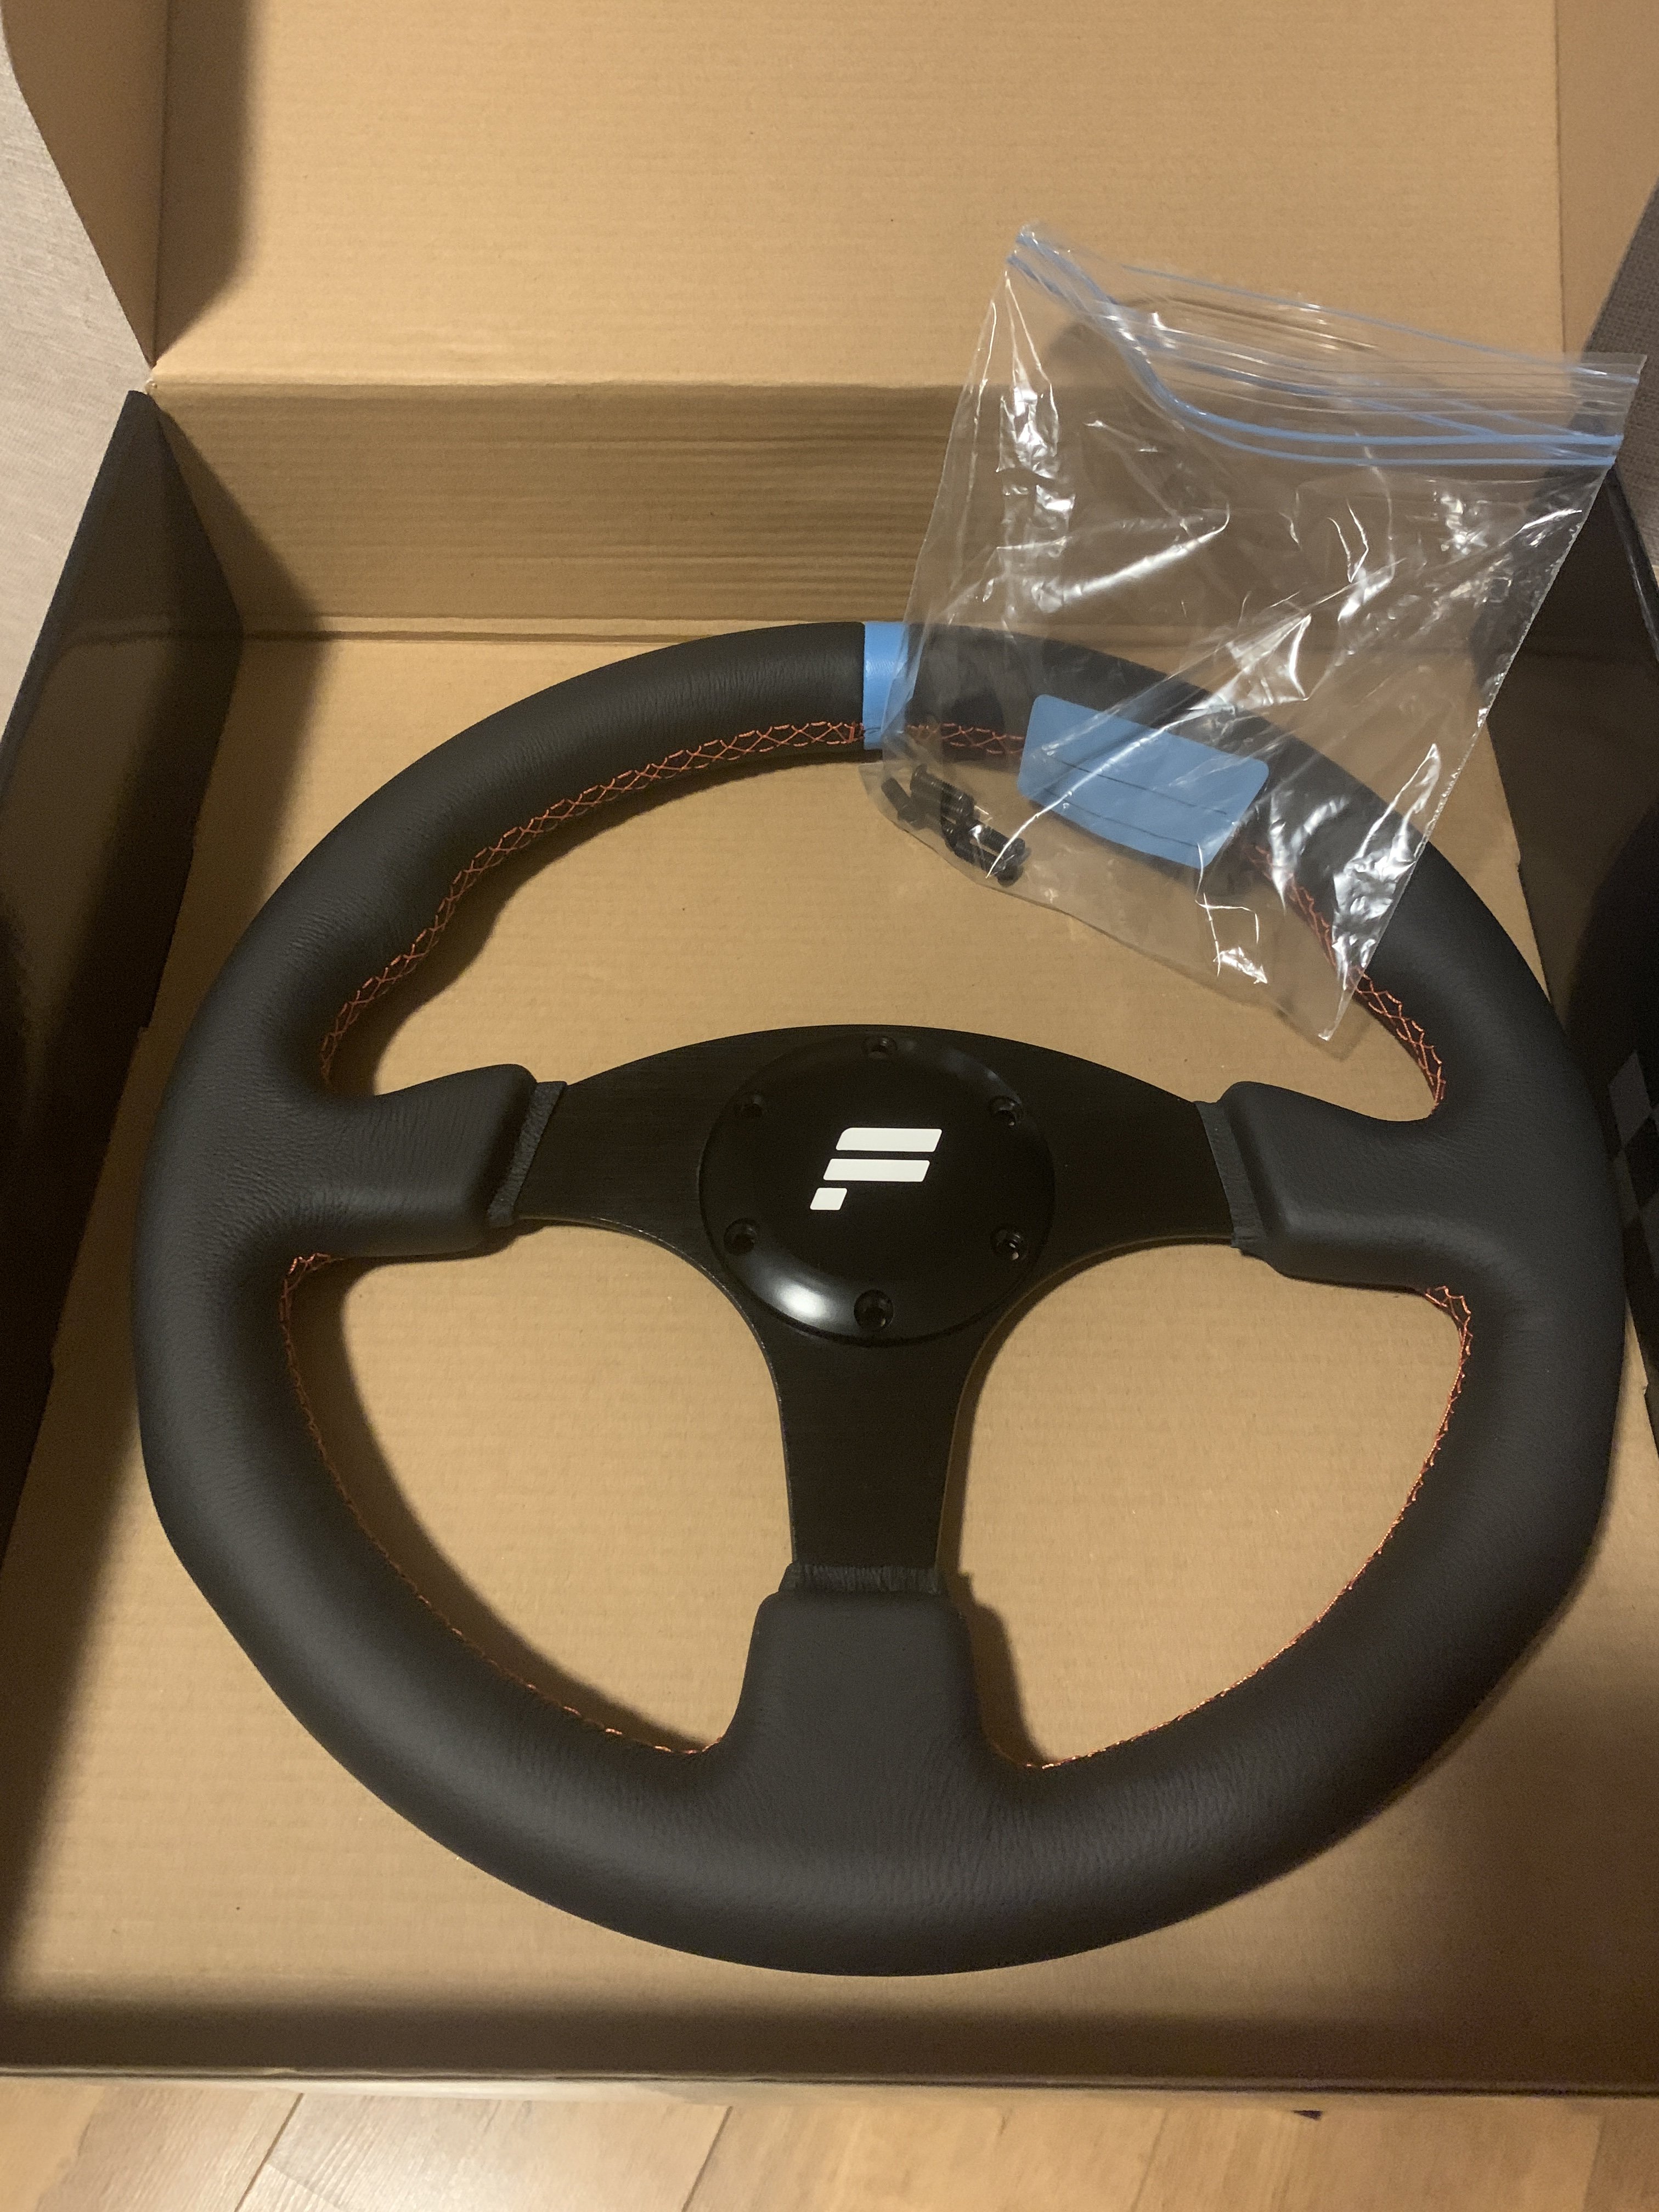 Sell - Fanatec clubsport rim R330 | OverTake (Formerly RaceDepartment)